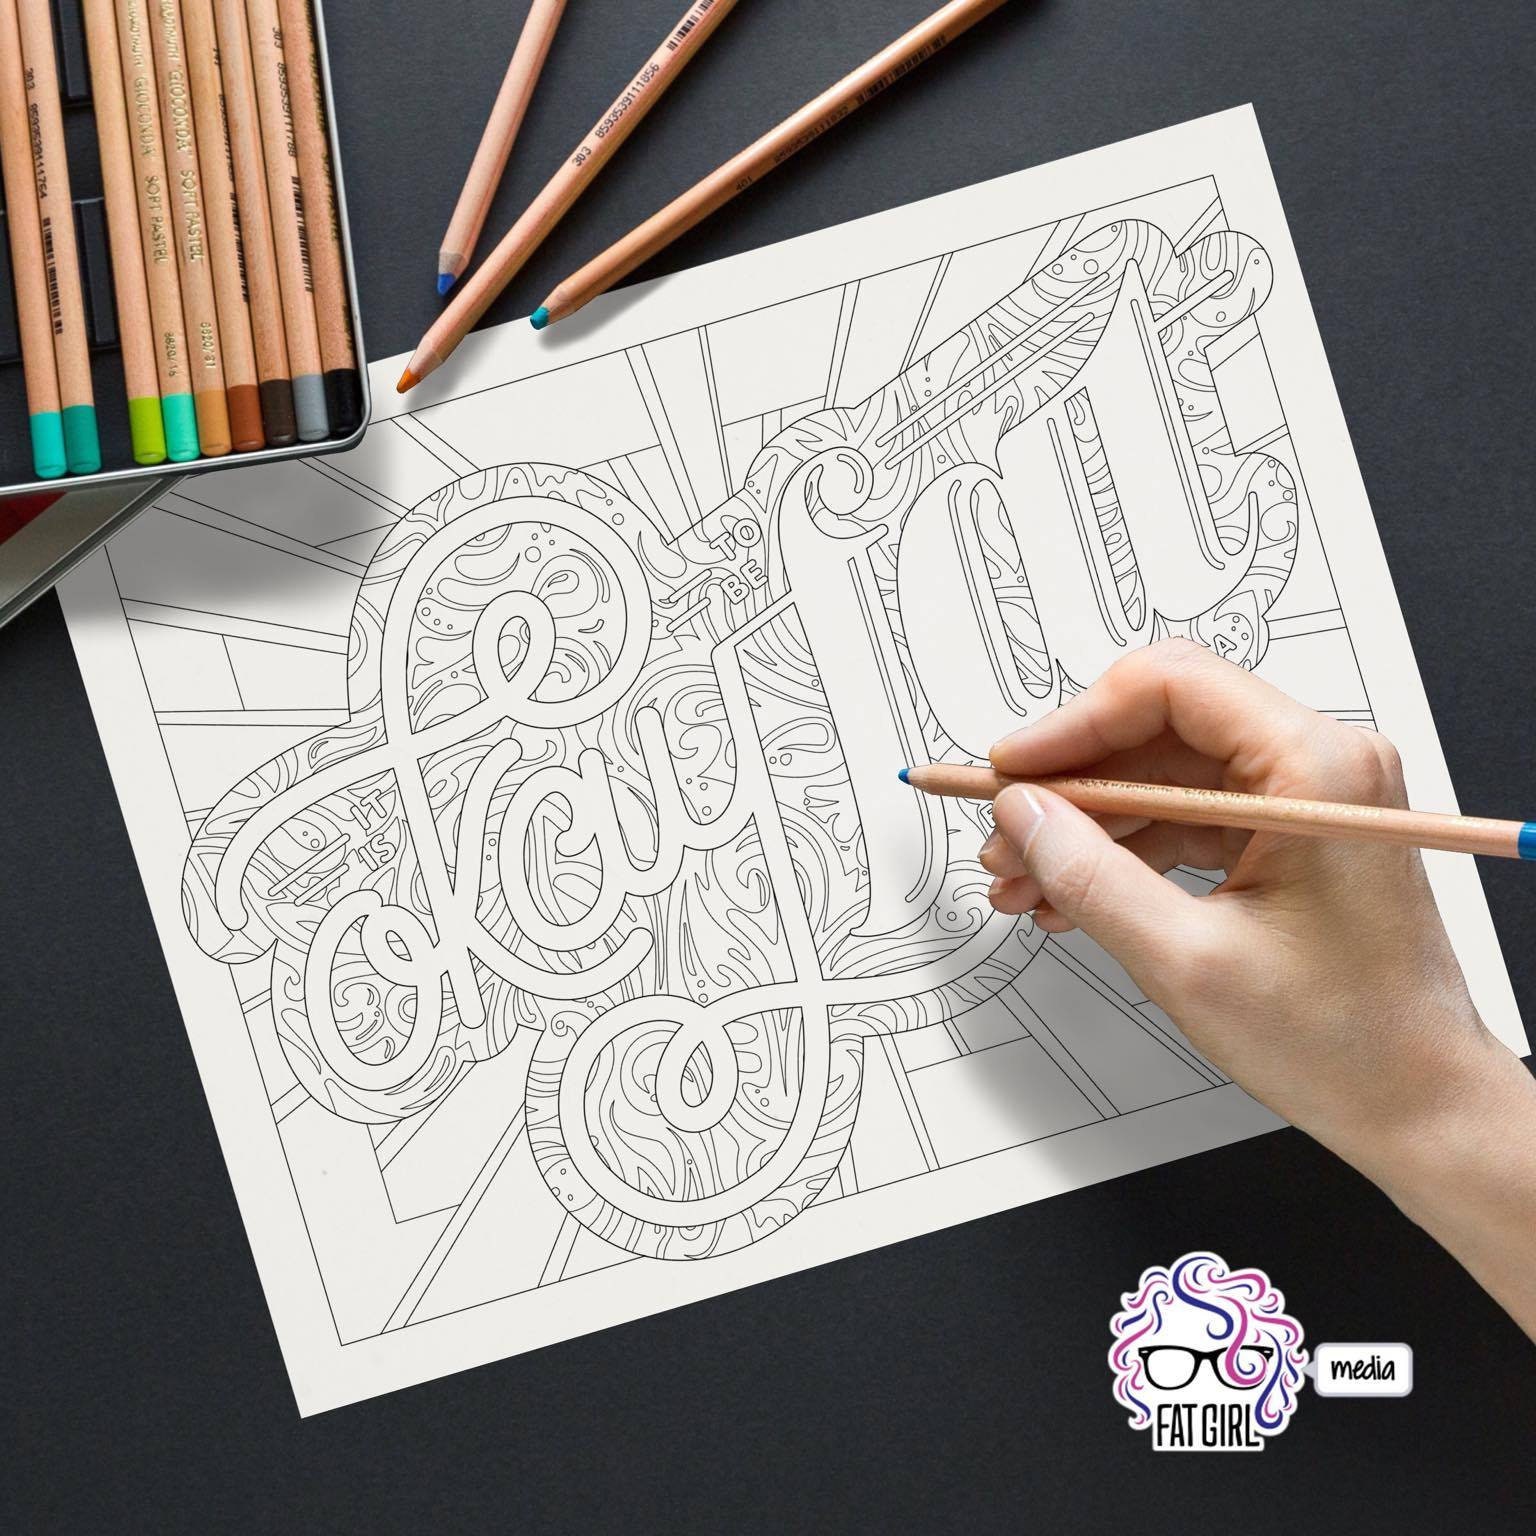 SET 8 Coloring Pages - Chubby Girls Graphic by FLWdesign